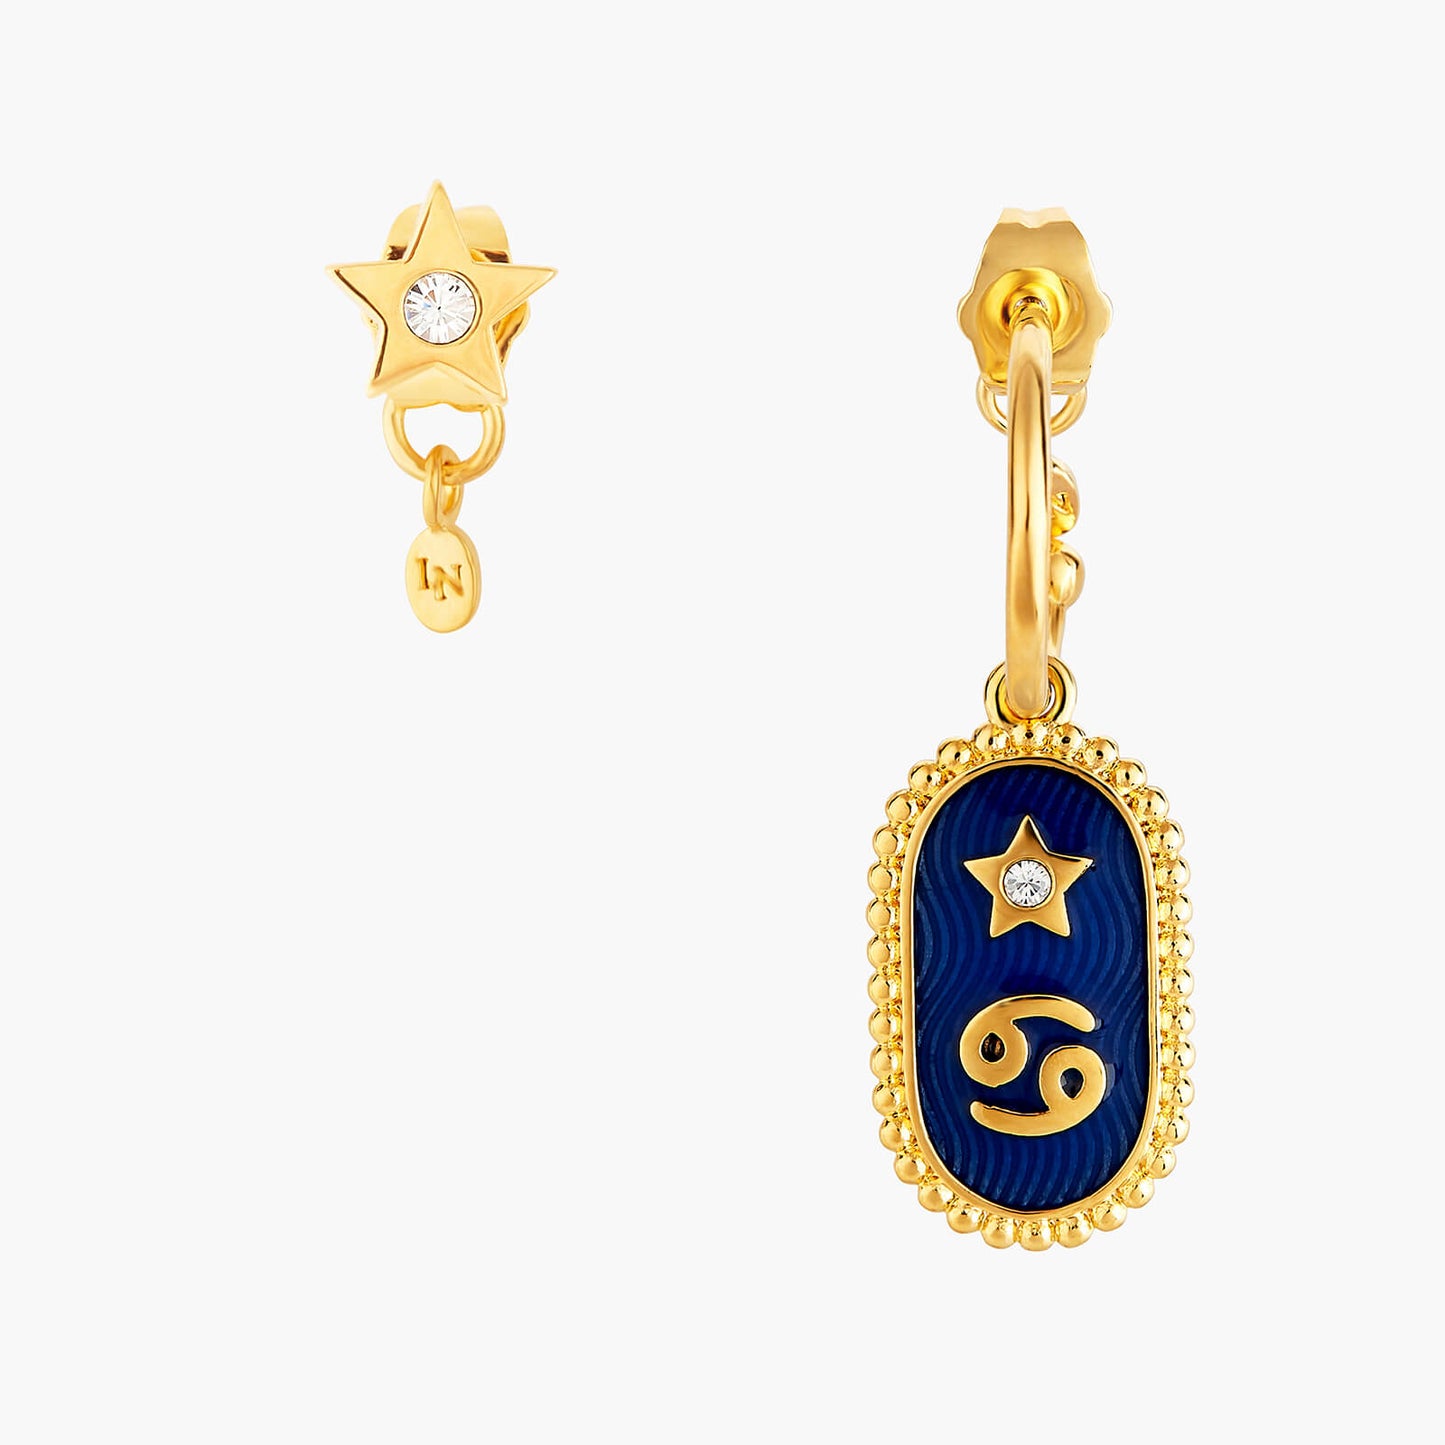 Cancer Zodiac Sign Earrings | ANCS1041